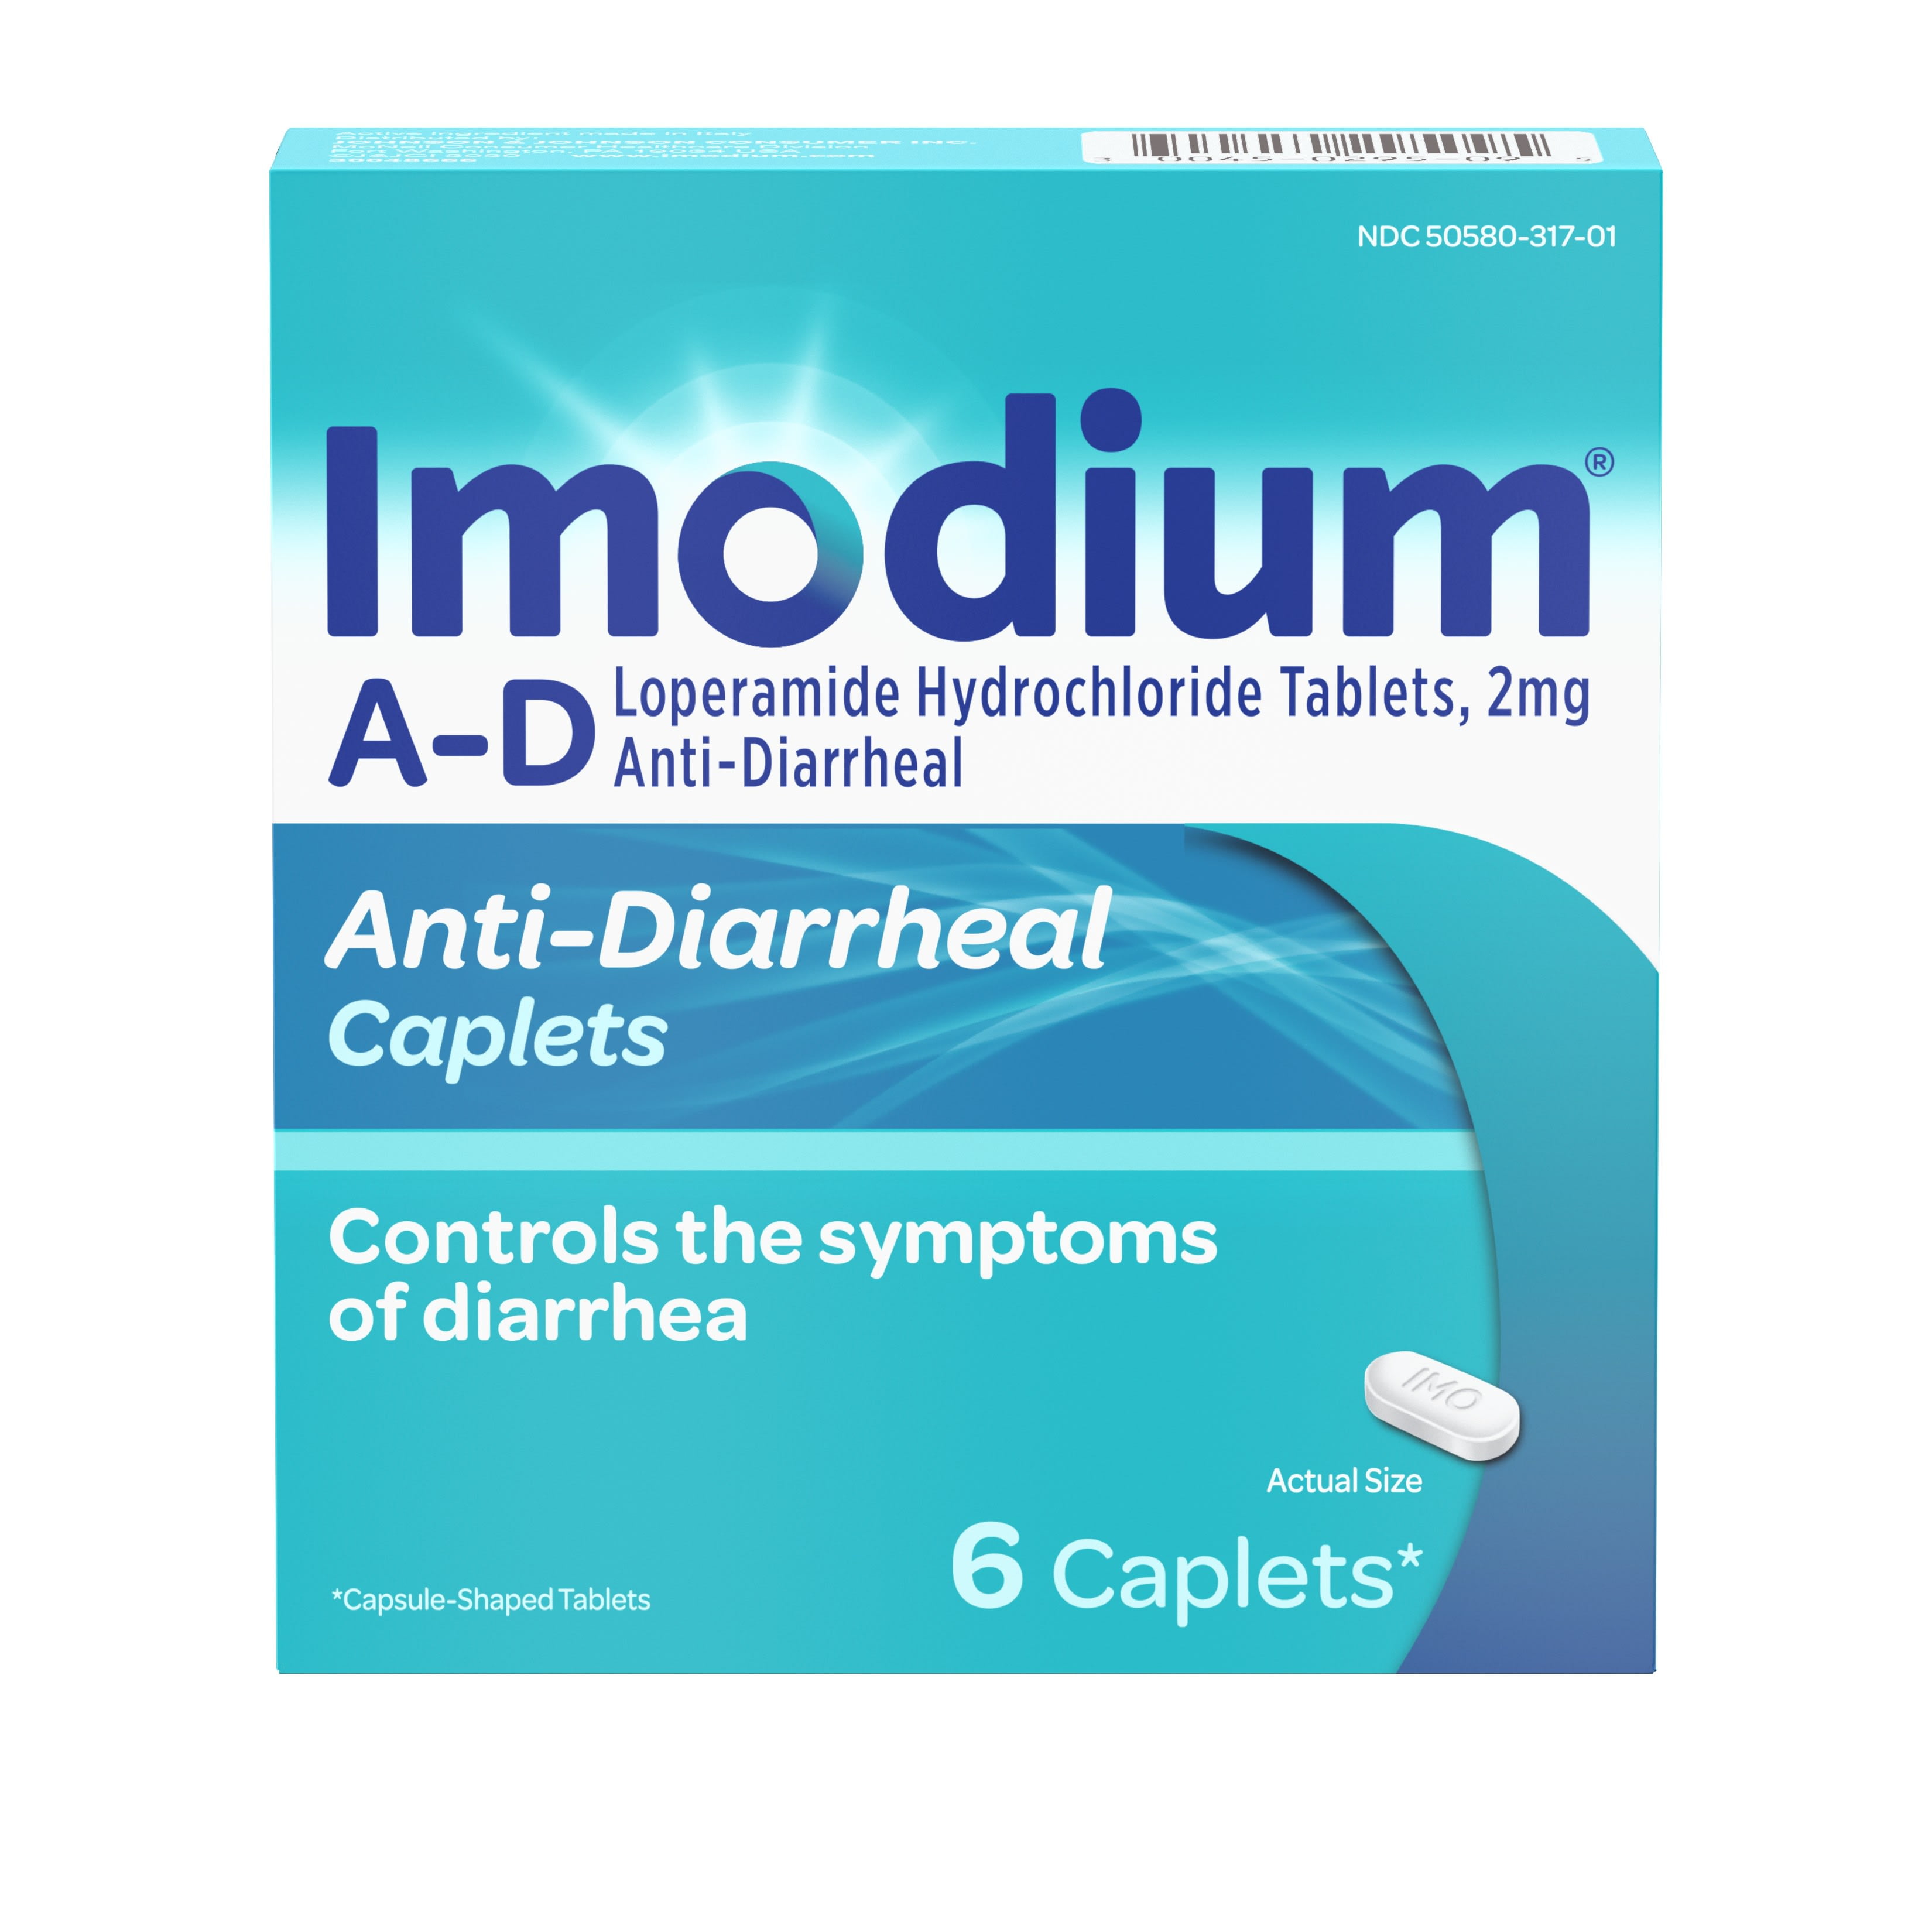 can i give imodium to dogs